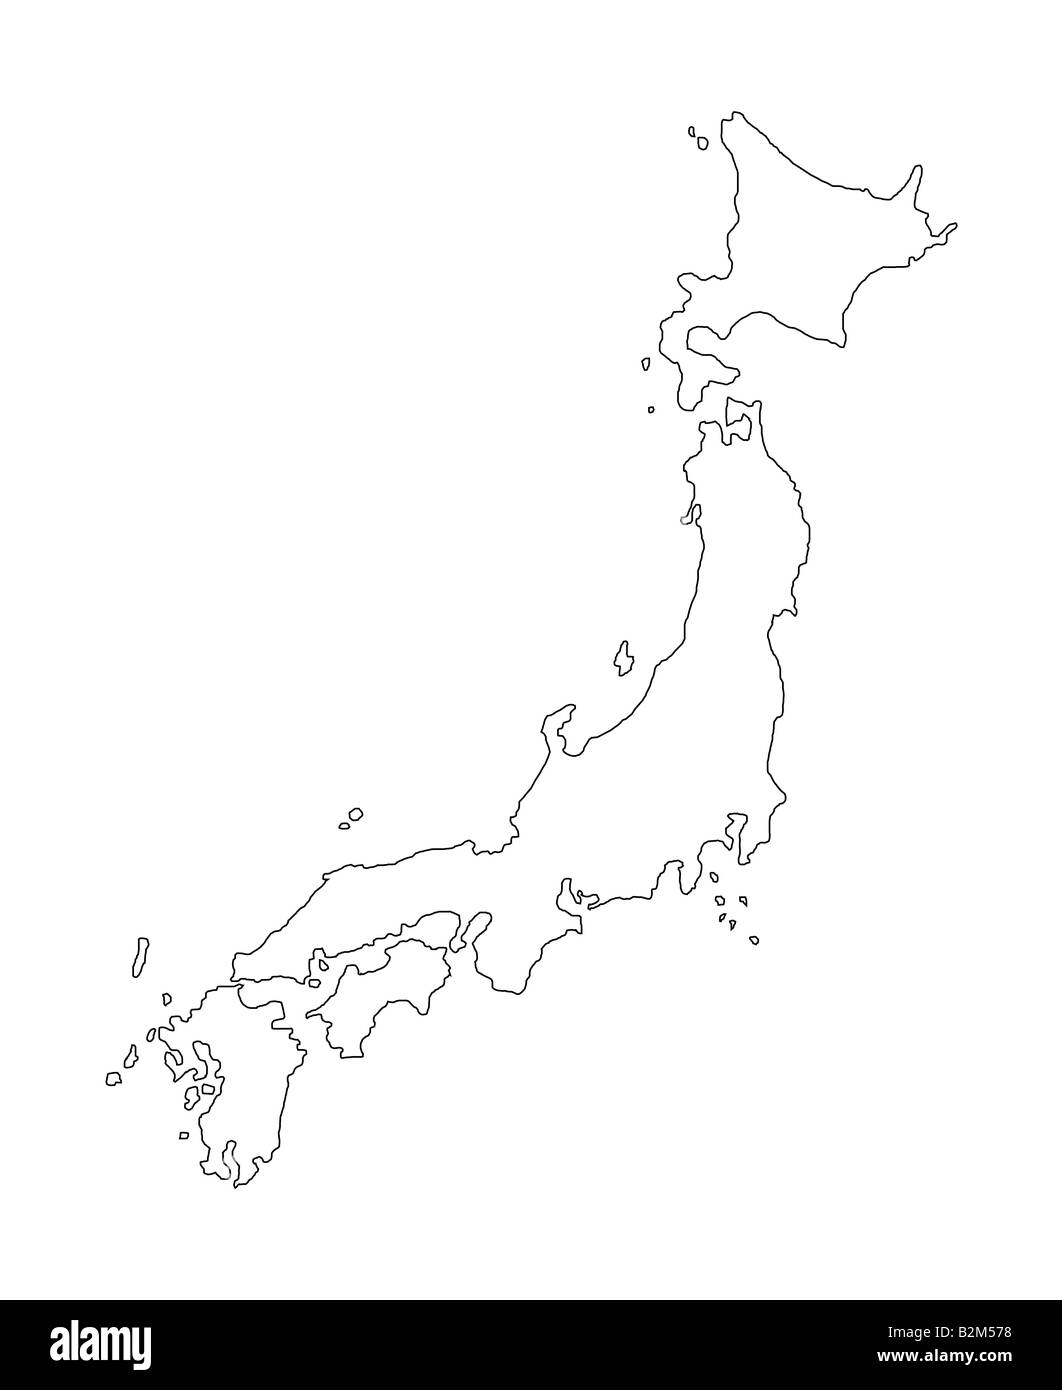 map of japan Stock Photo